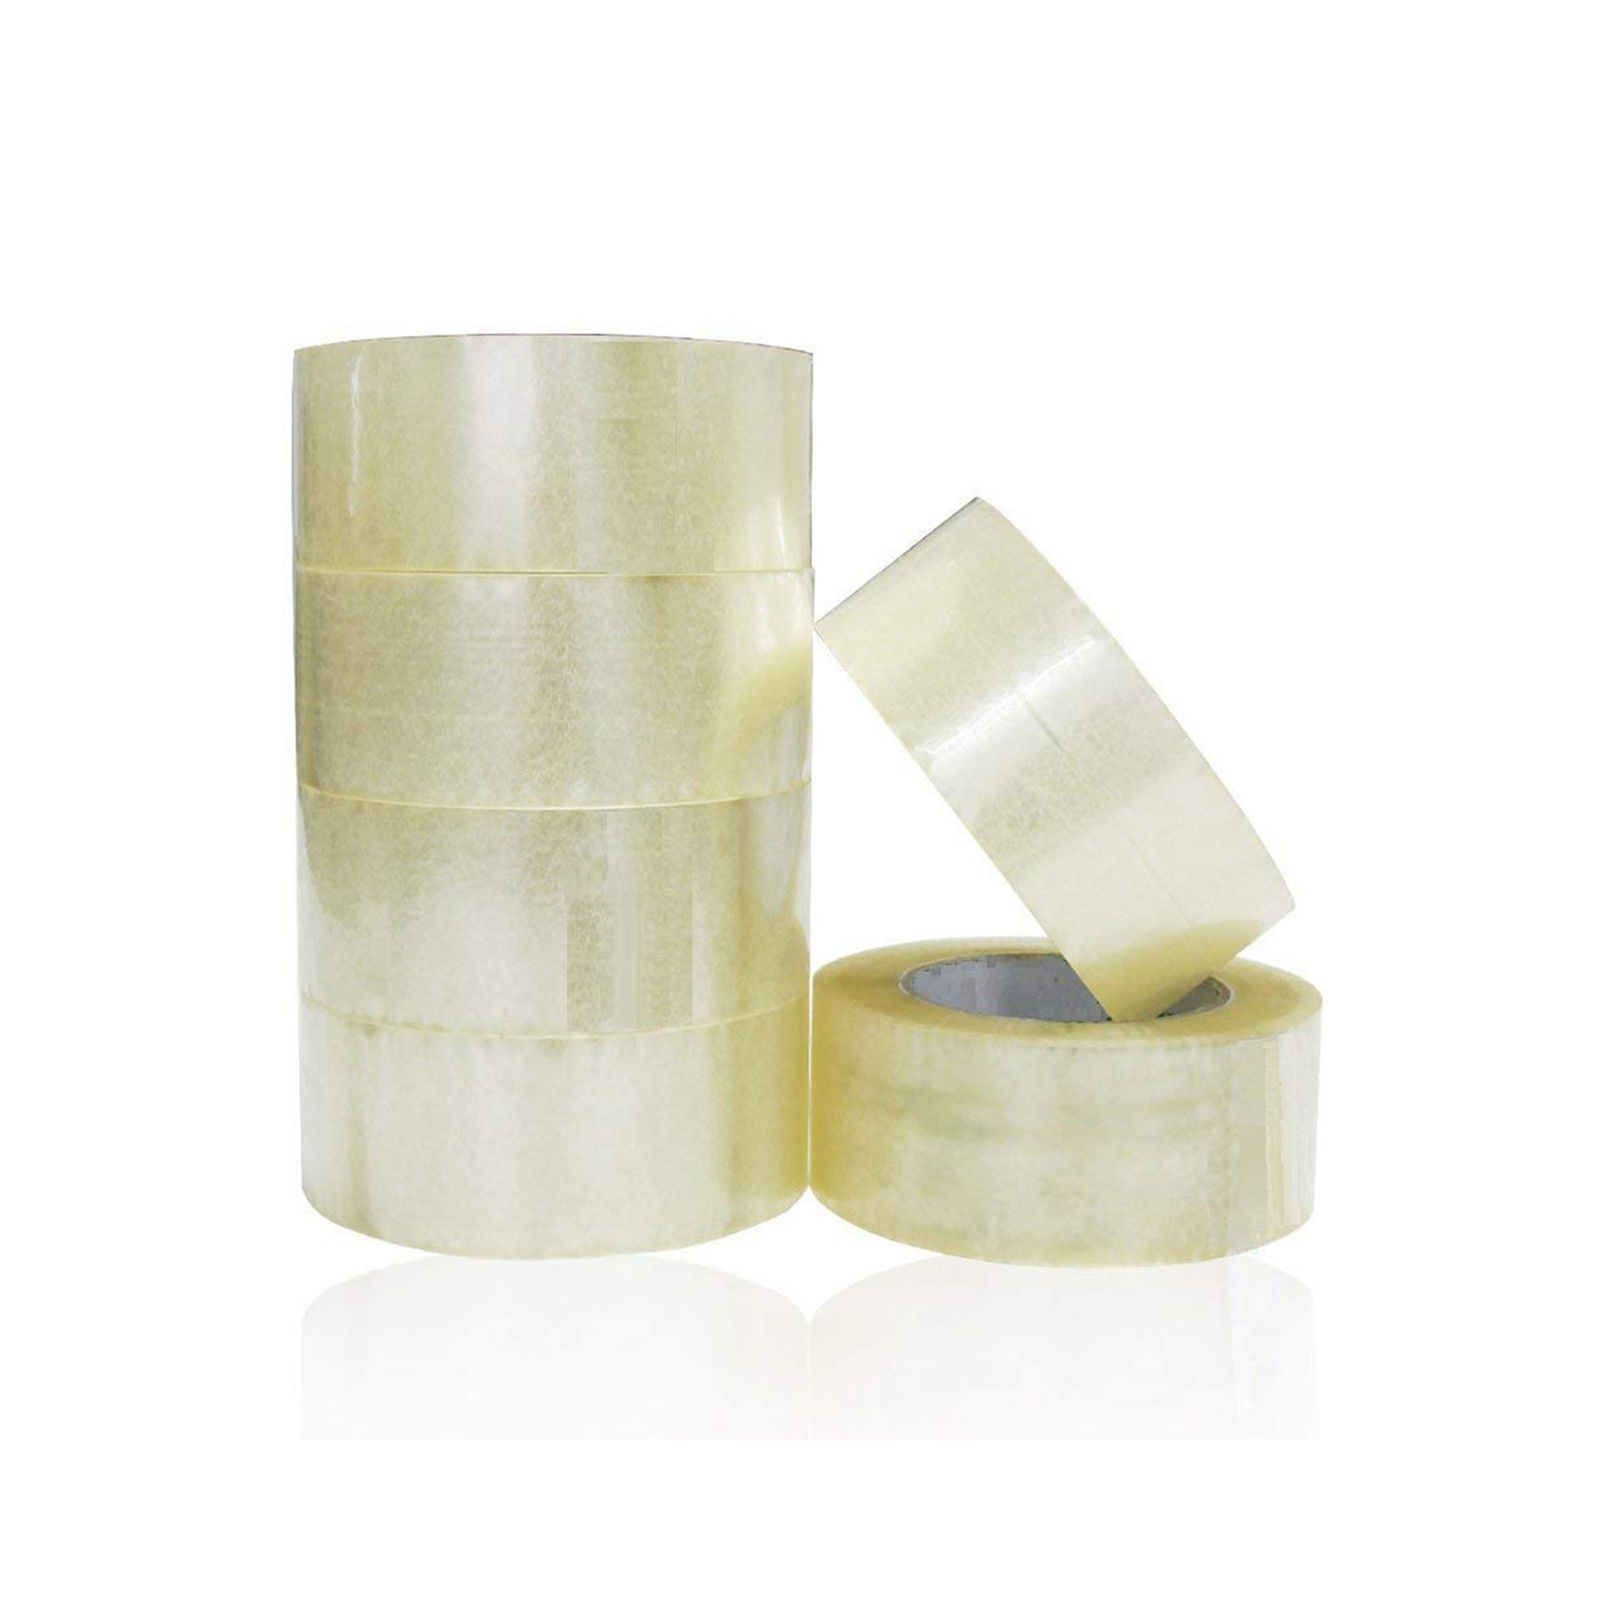 Clear Packing Tape 2 inch x 100 Yards Per Roll (6 Pack)